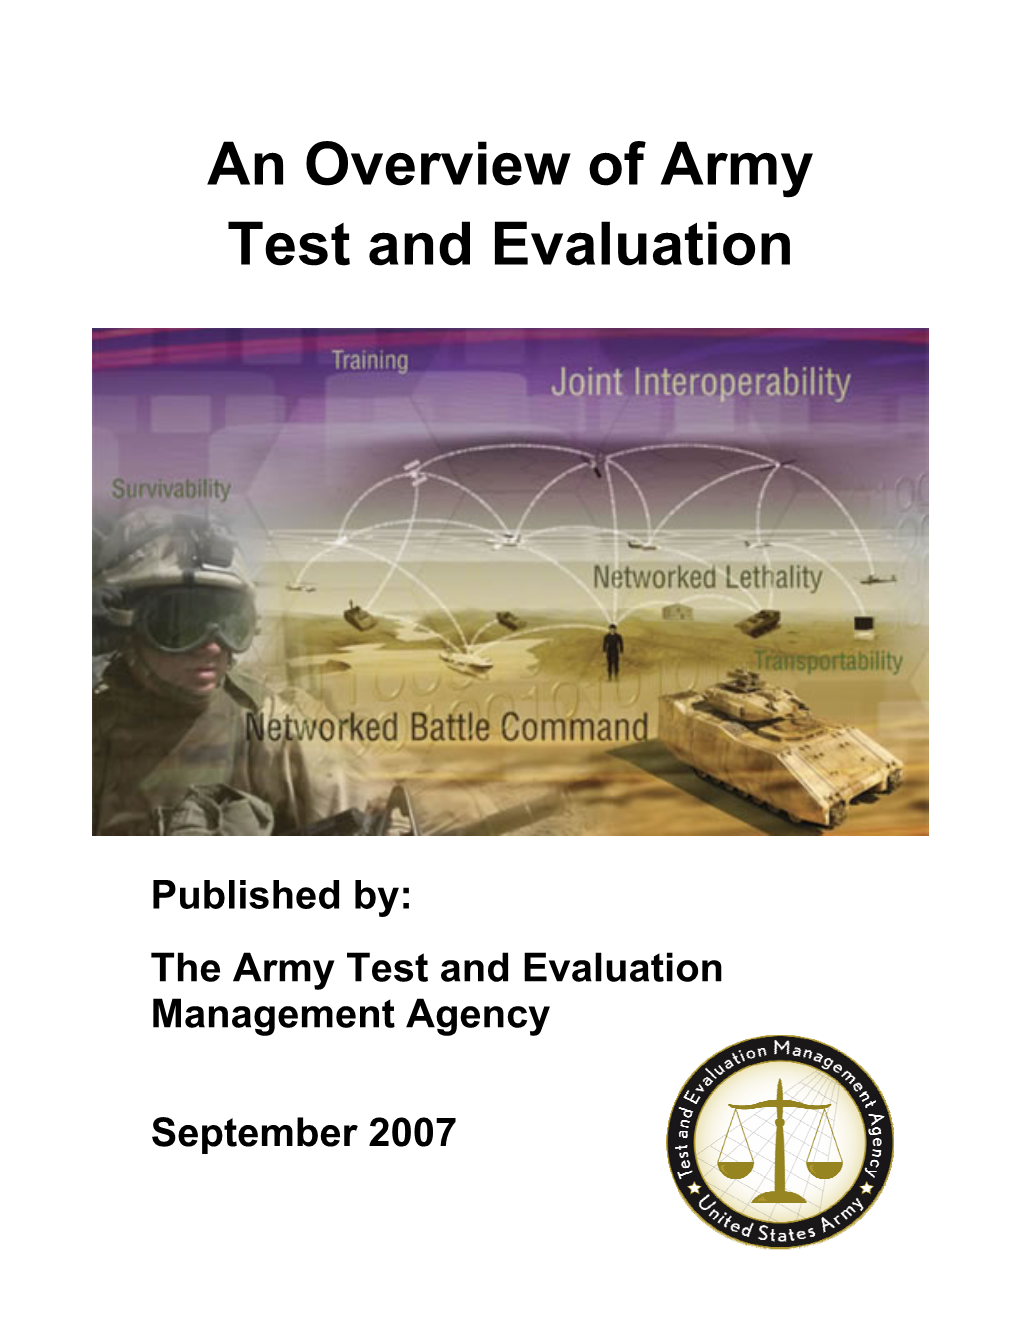 An Overview of Army Test and Evaluation